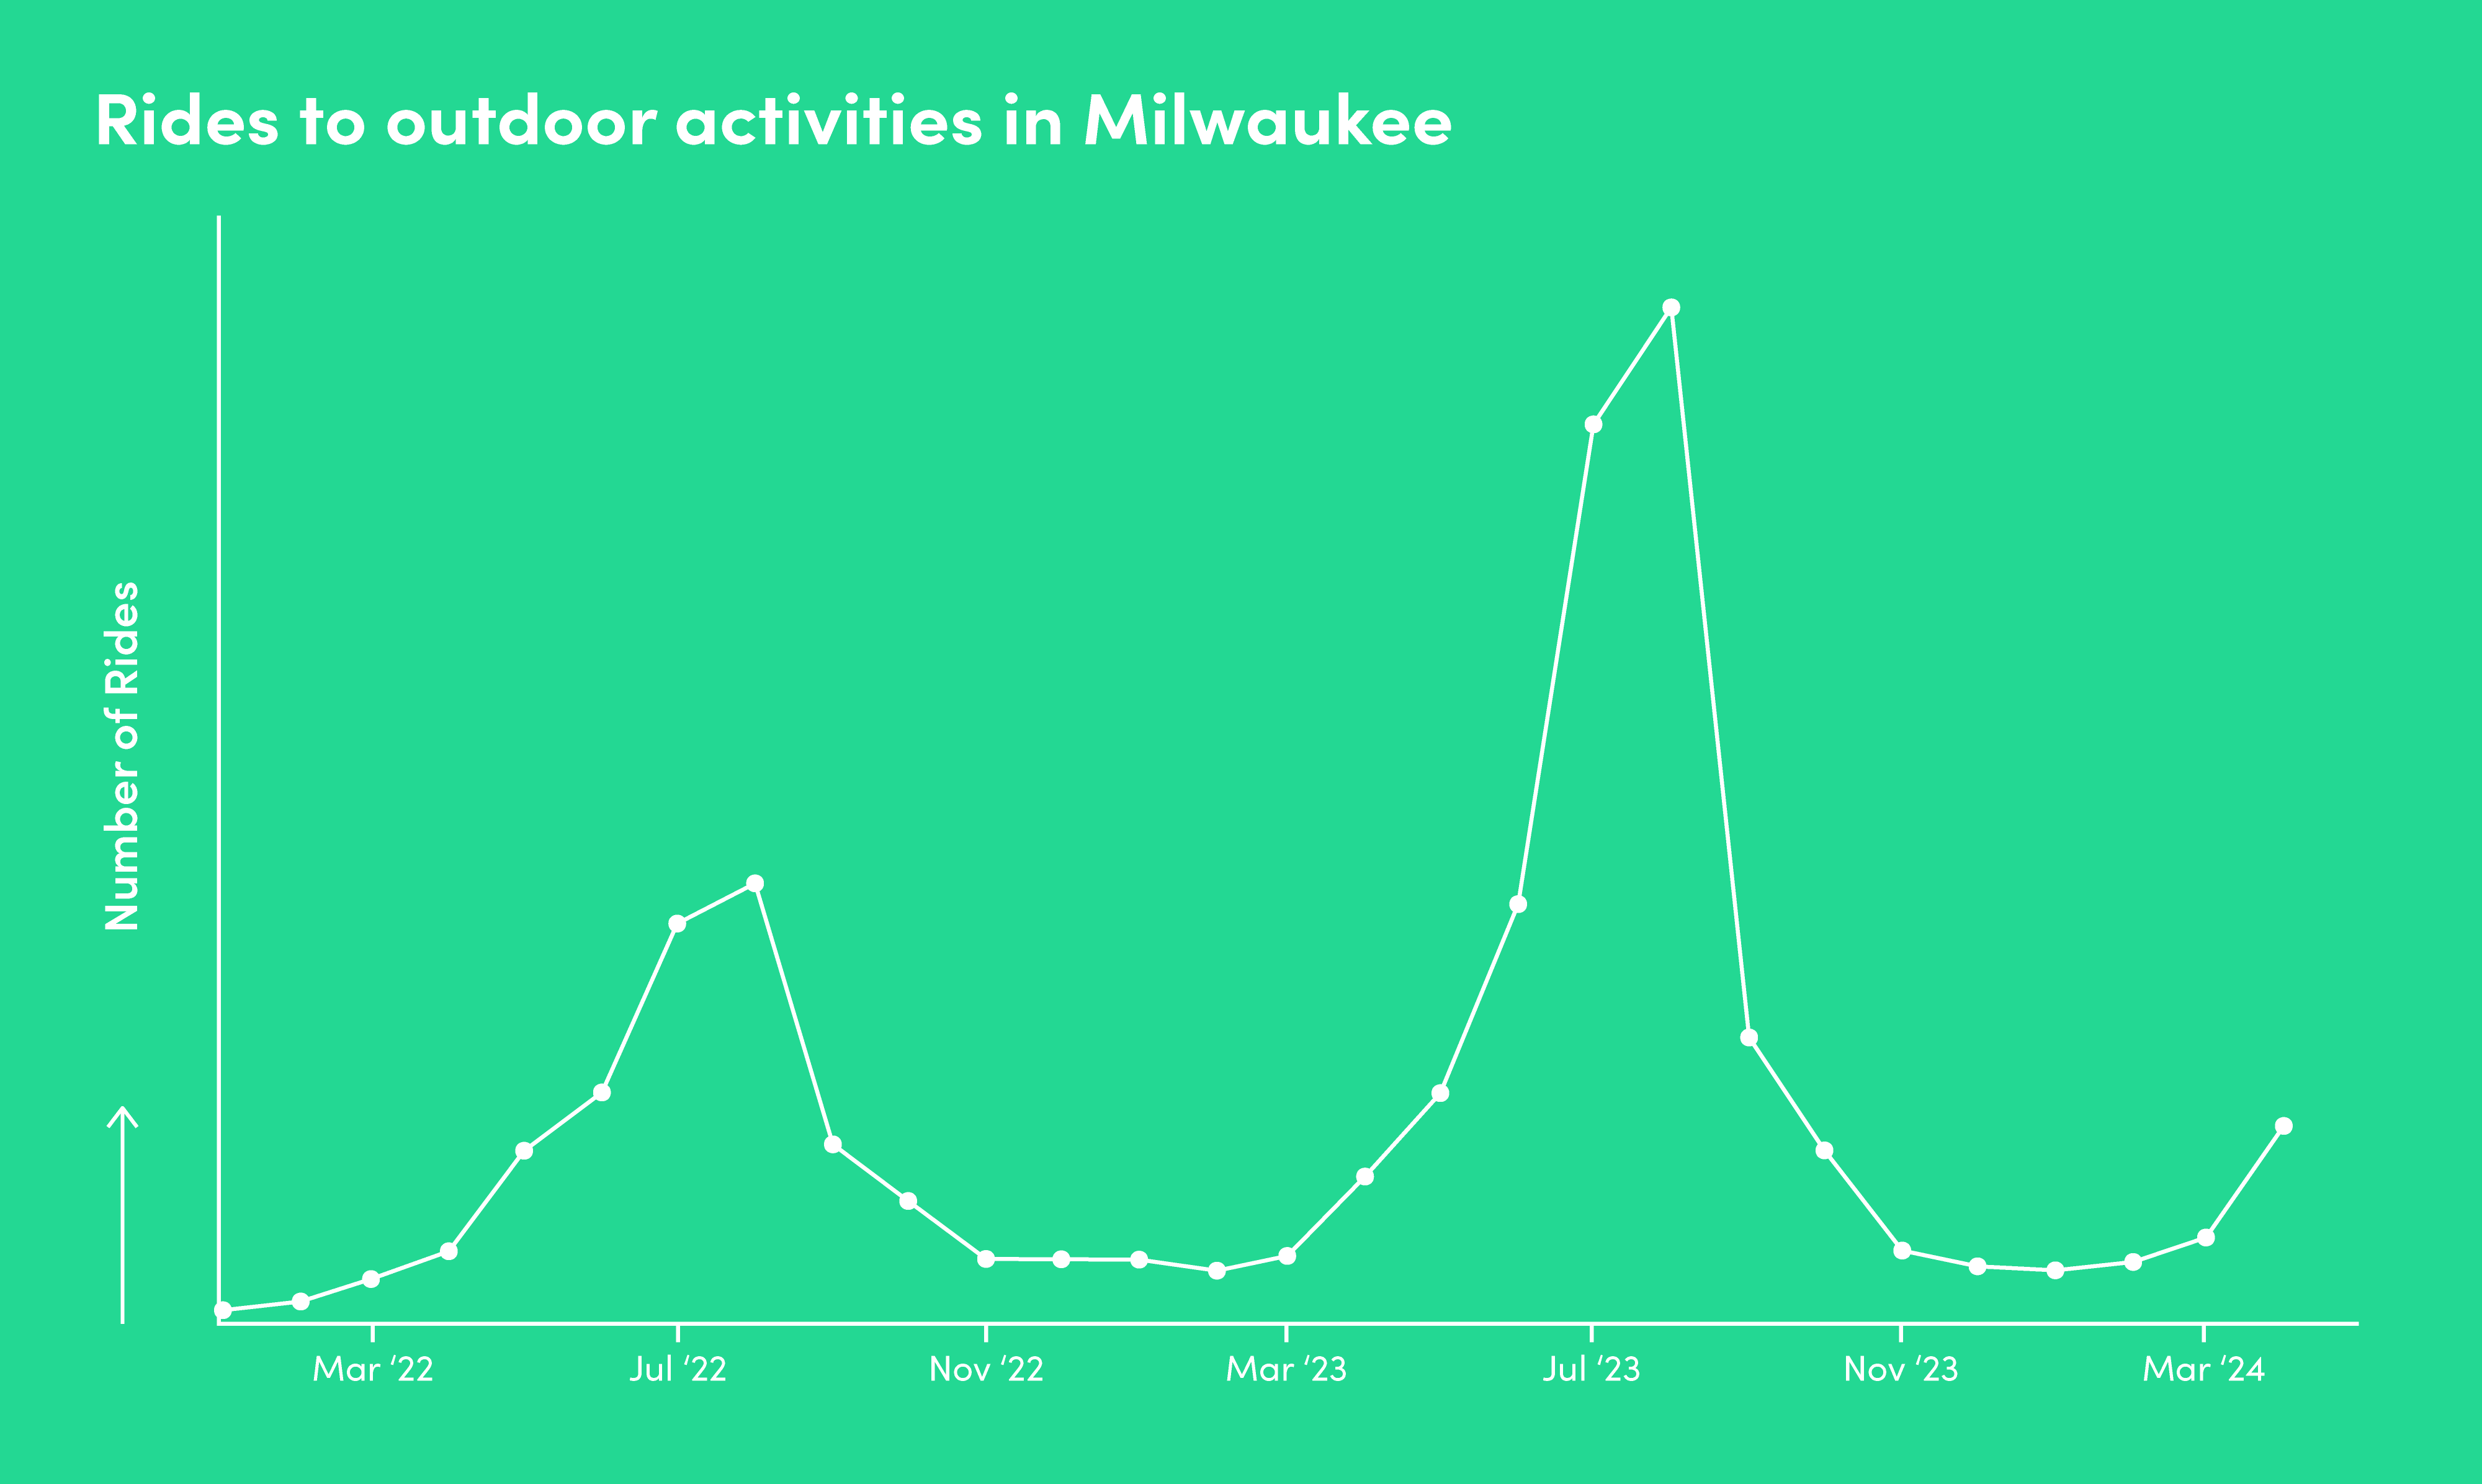 Chart showing rides to outdoor activities in Milwaukee.